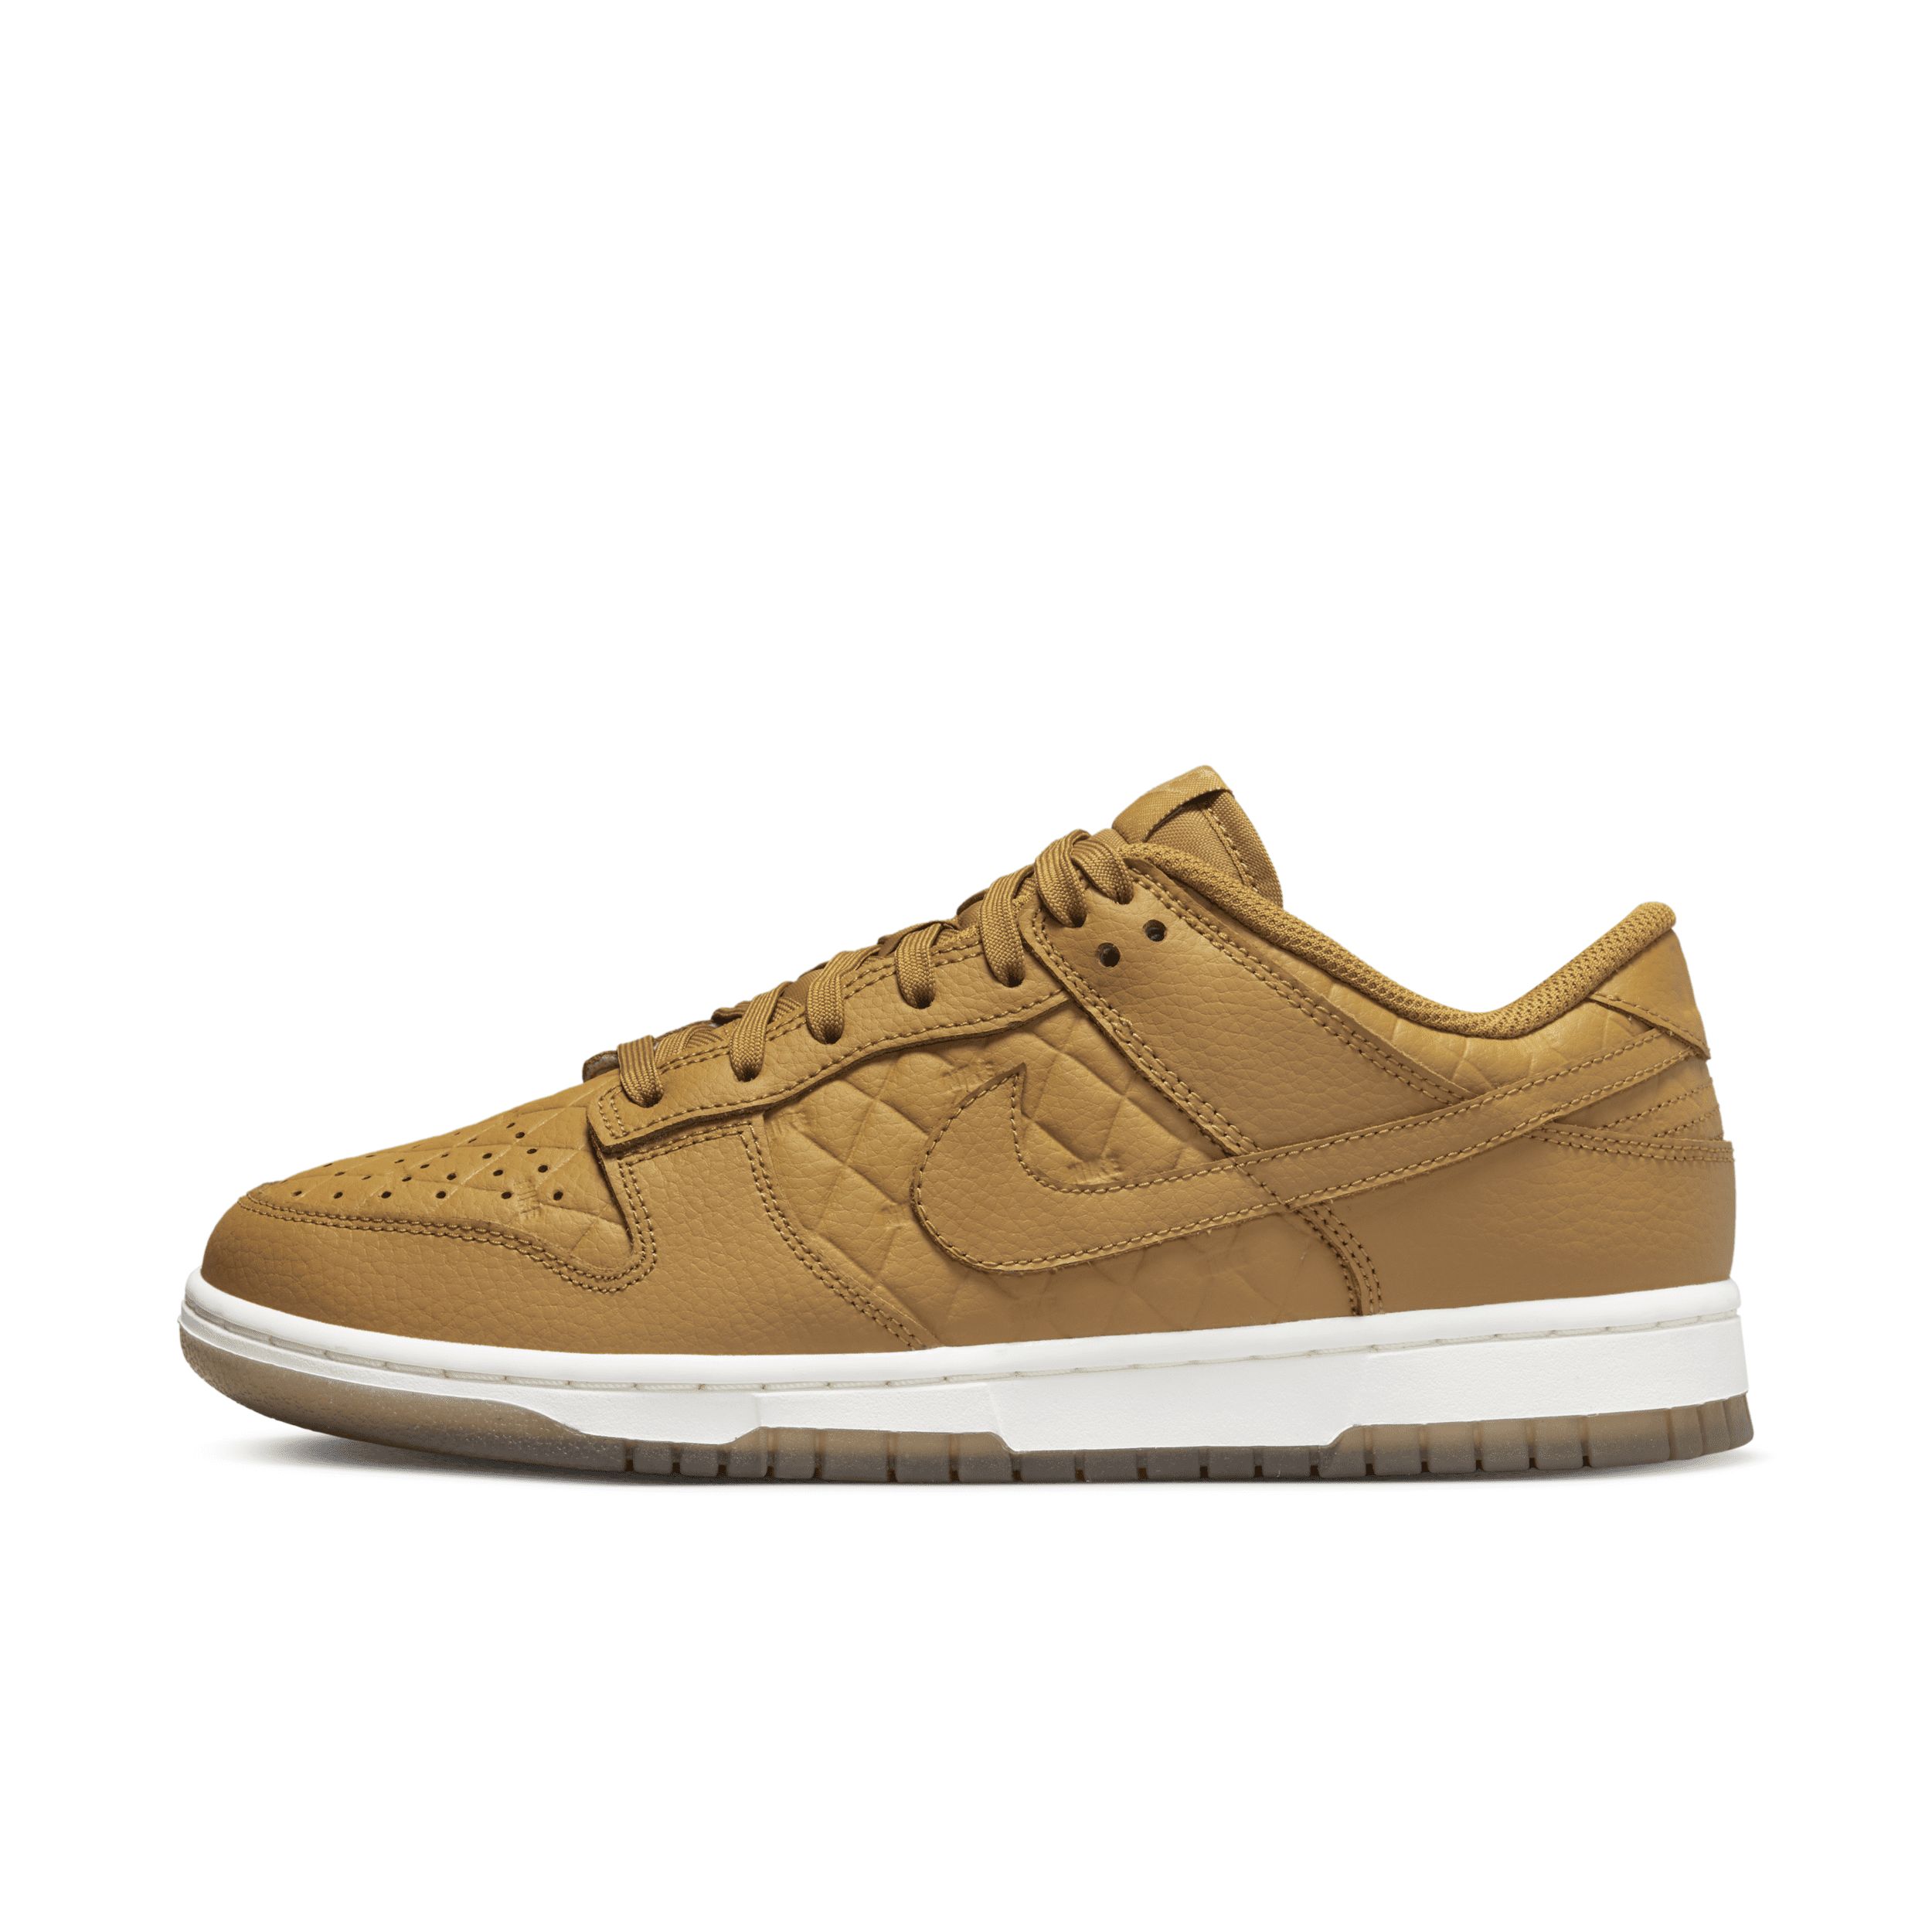 Nike Women's Dunk Low Shoes in Brown, Size: 7 | DX3374-700 | Nike (US)